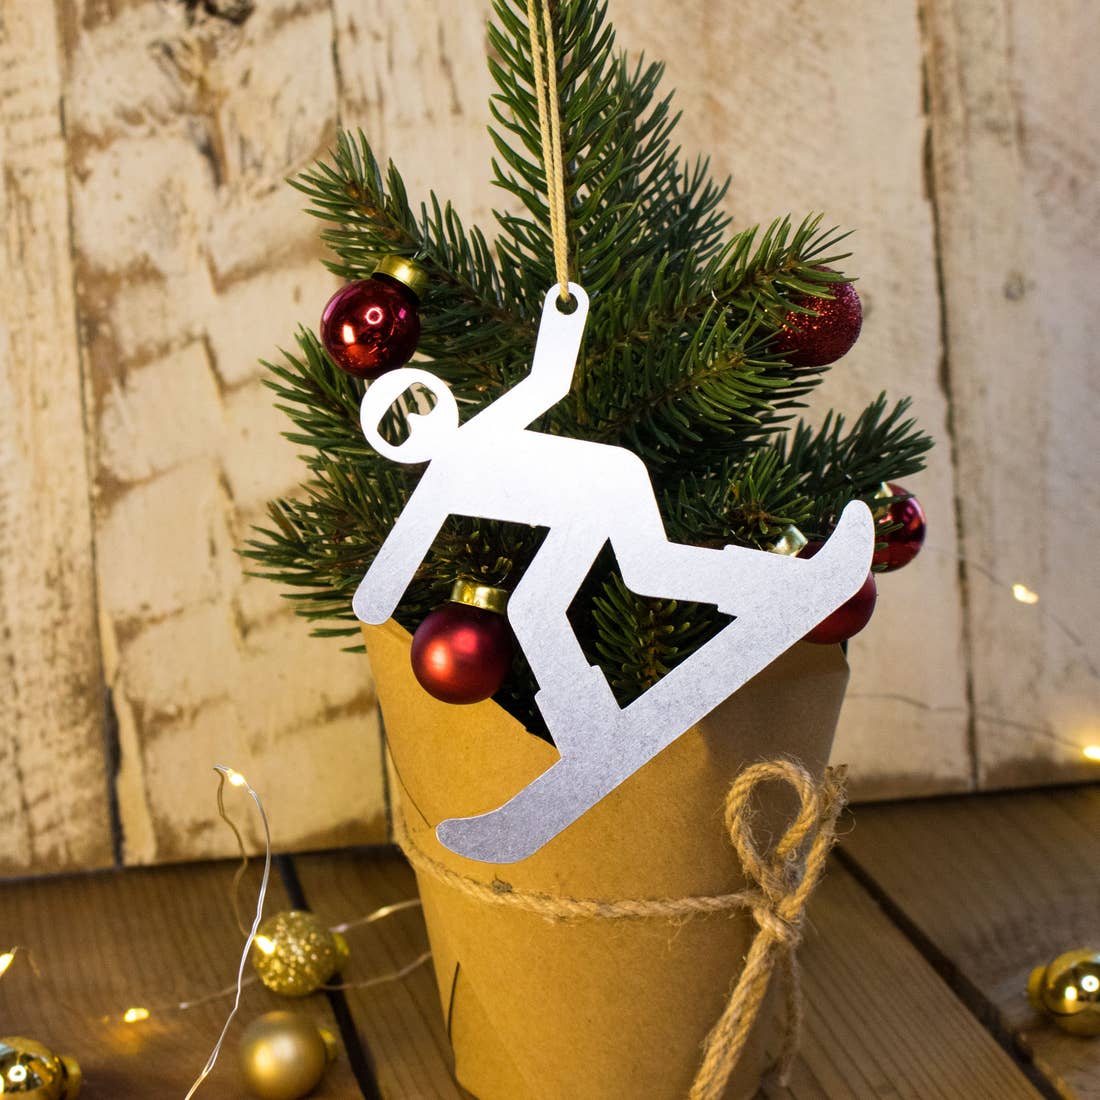 Outline of a Snowboarder Aluminum Ornament